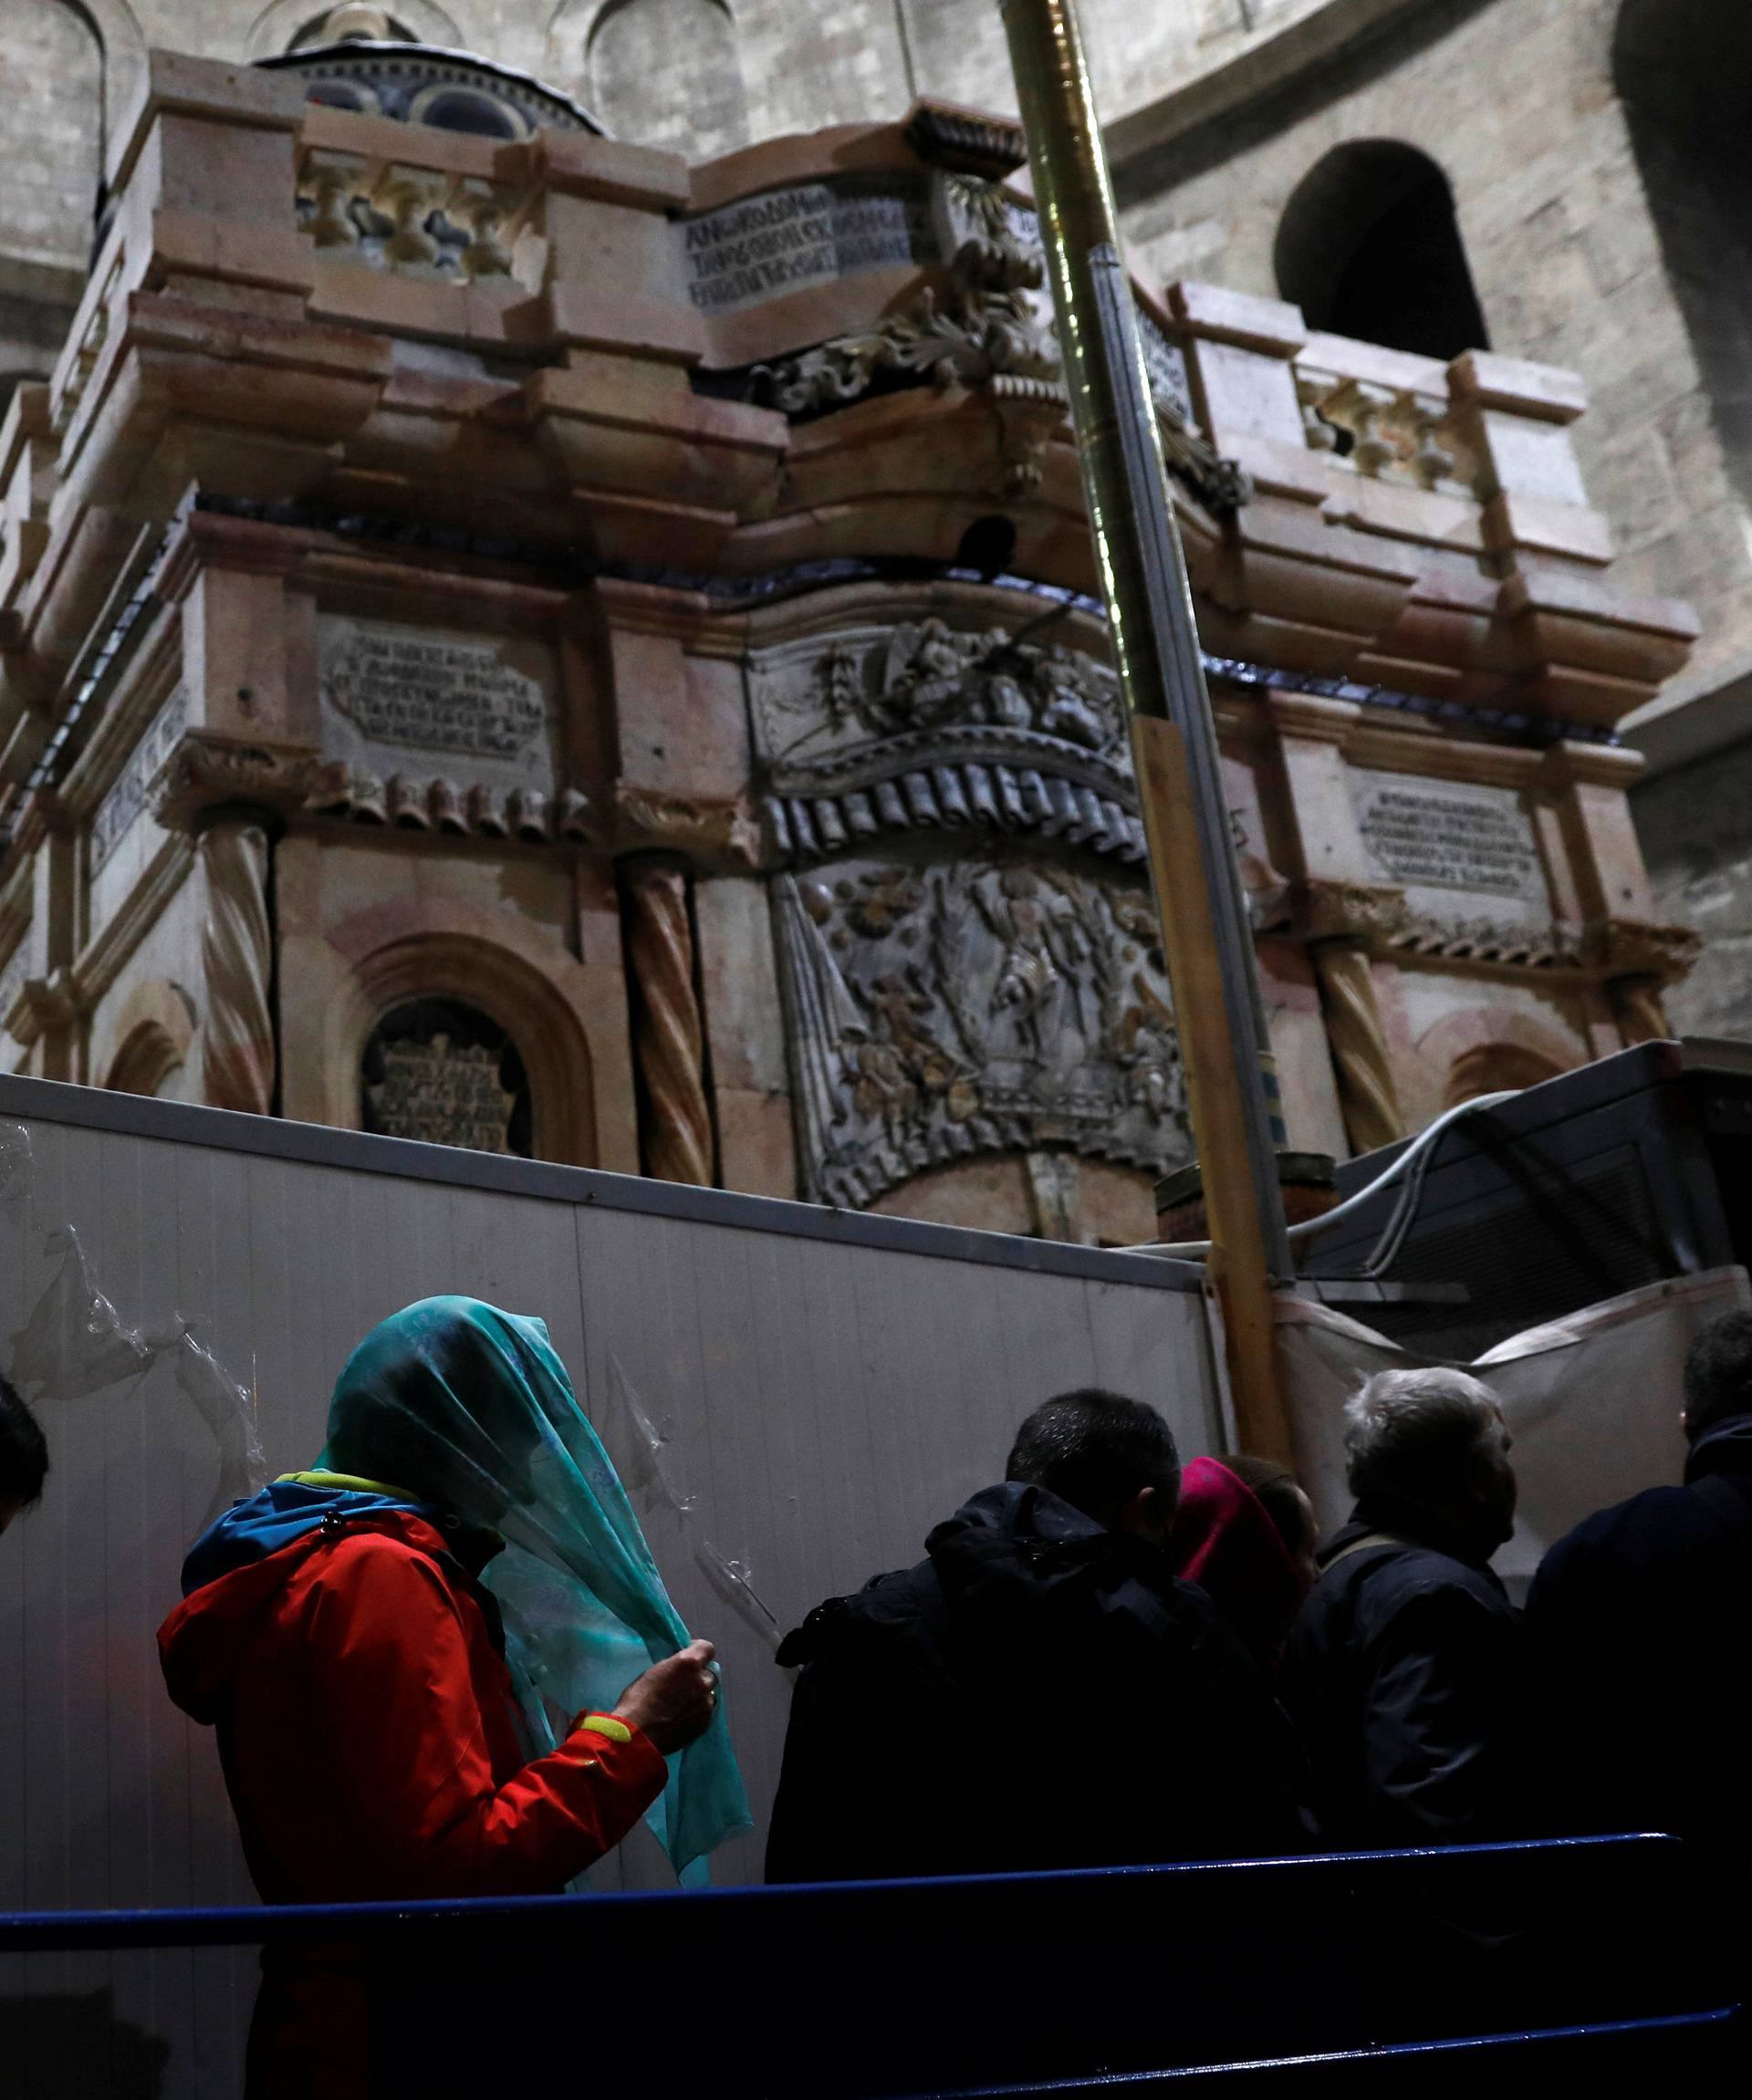 Visitors stand near the newly restored Edicule, the ancient structure housing the tomb, which according to Christian belief is where Jesus's body was anointed and buried, at the Church of the Holy Sepulchre in Jerusalem's Old City